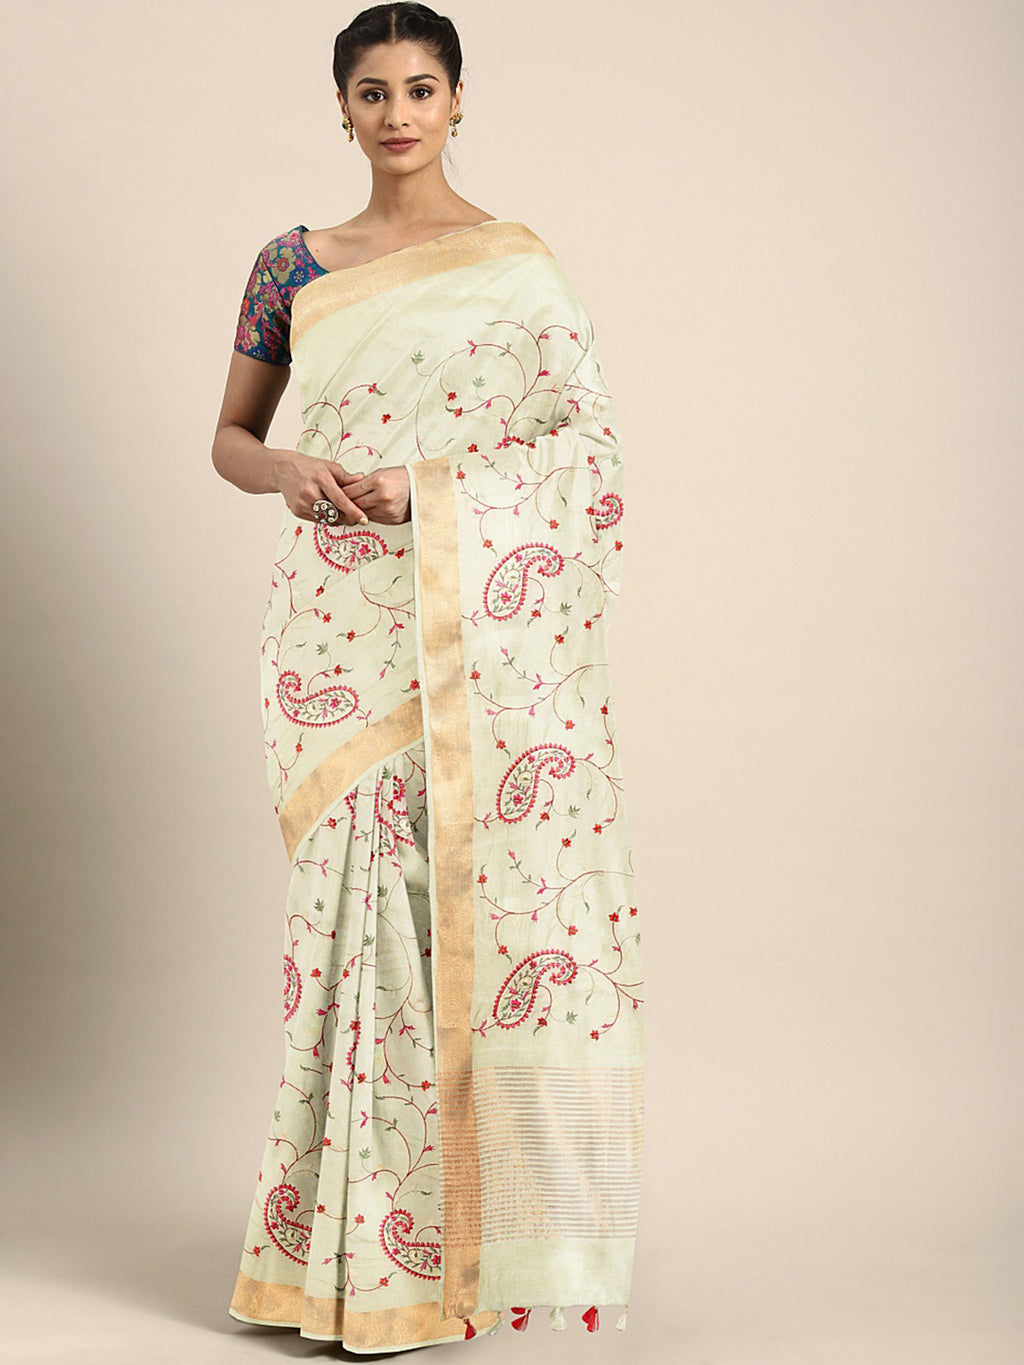 Kalakari India Kota Silk Embroidered Saree With Blouse ALBGSA0162-Saree-Kalakari India-ALBGSA0162-Geographical Indication, Hand Crafted, Heritage Prints, Linen, Natural Dyes, Pure Cotton, Sarees, Sustainable Fabrics, Woven-[Linen,Ethnic,wear,Fashionista,Handloom,Handicraft,Indigo,blockprint,block,print,Cotton,Chanderi,Blue, latest,classy,party,bollywood,trendy,summer,style,traditional,formal,elegant,unique,style,hand,block,print, dabu,booti,gift,present,glamorous,affordable,collectible,Sari,Sare